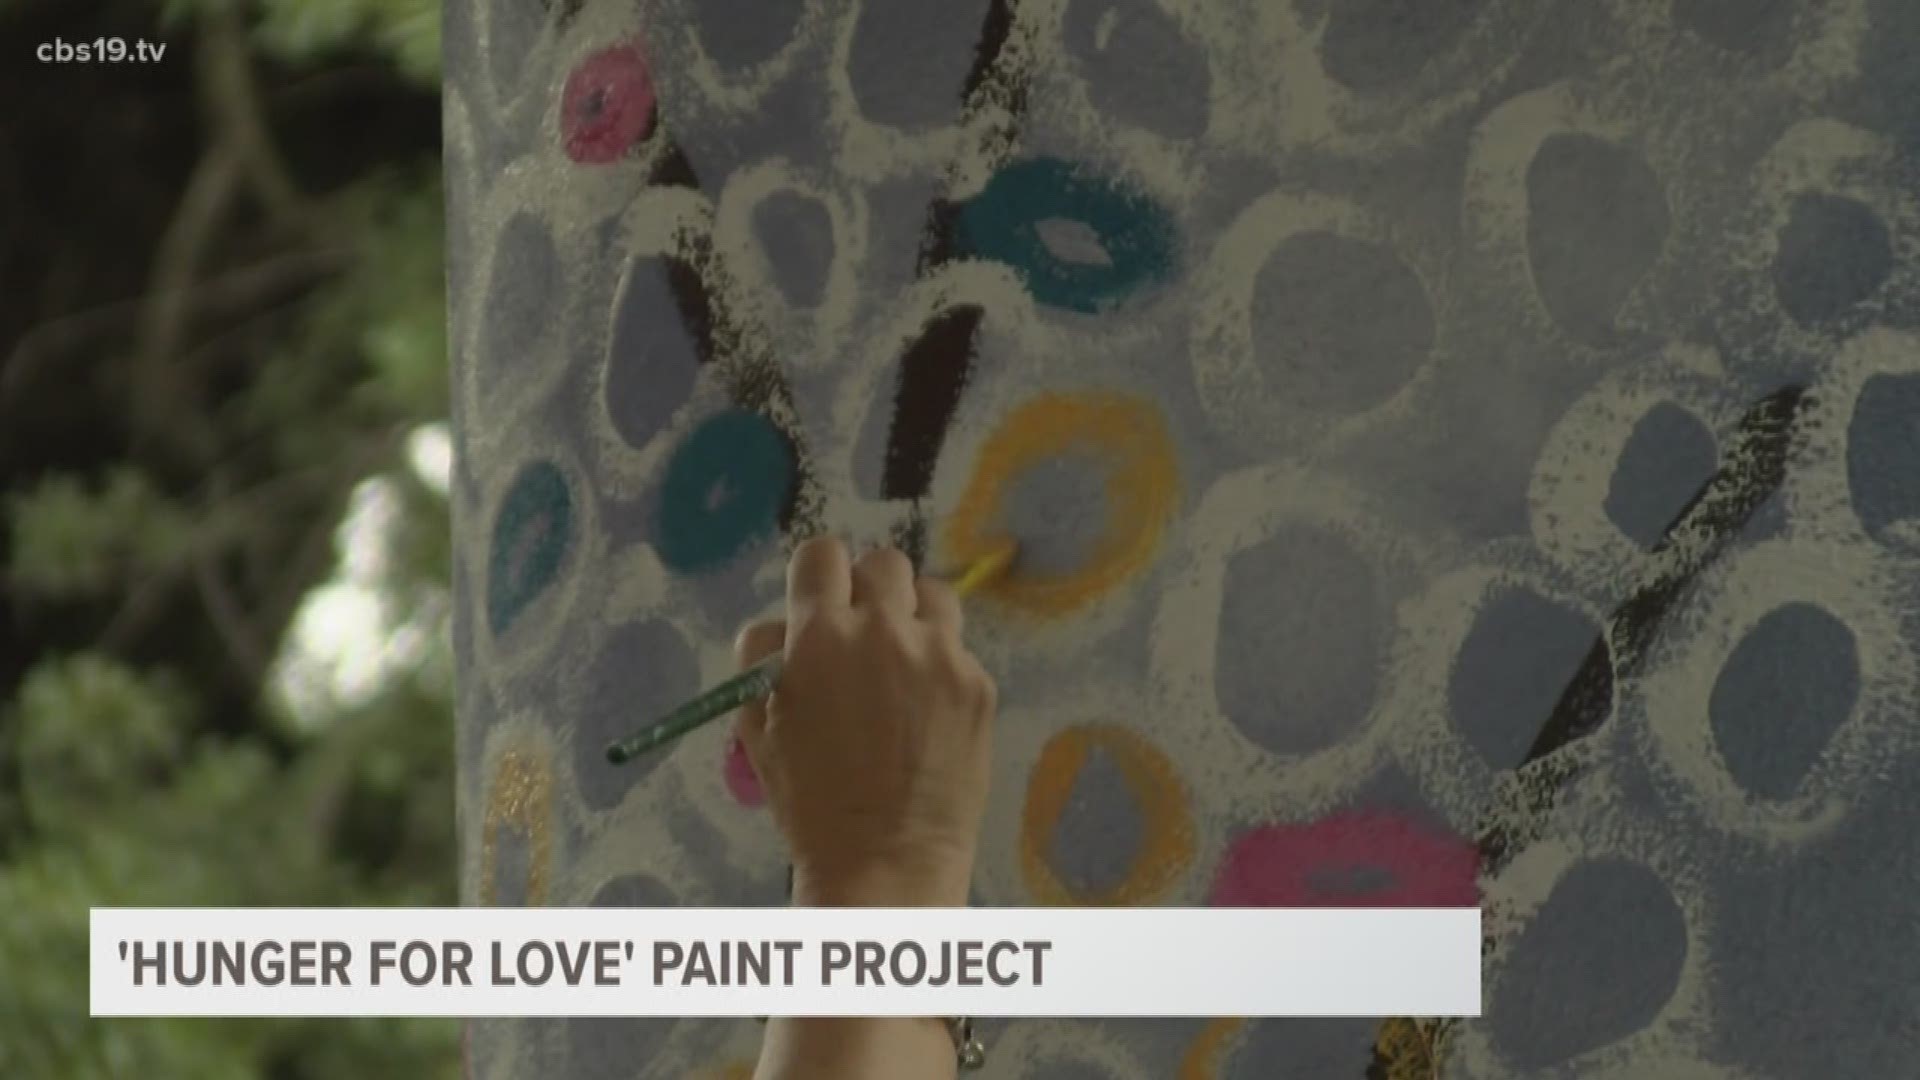 'Hunger for Love' is inviting locals to paint every Saturday to get some perspective on their community.